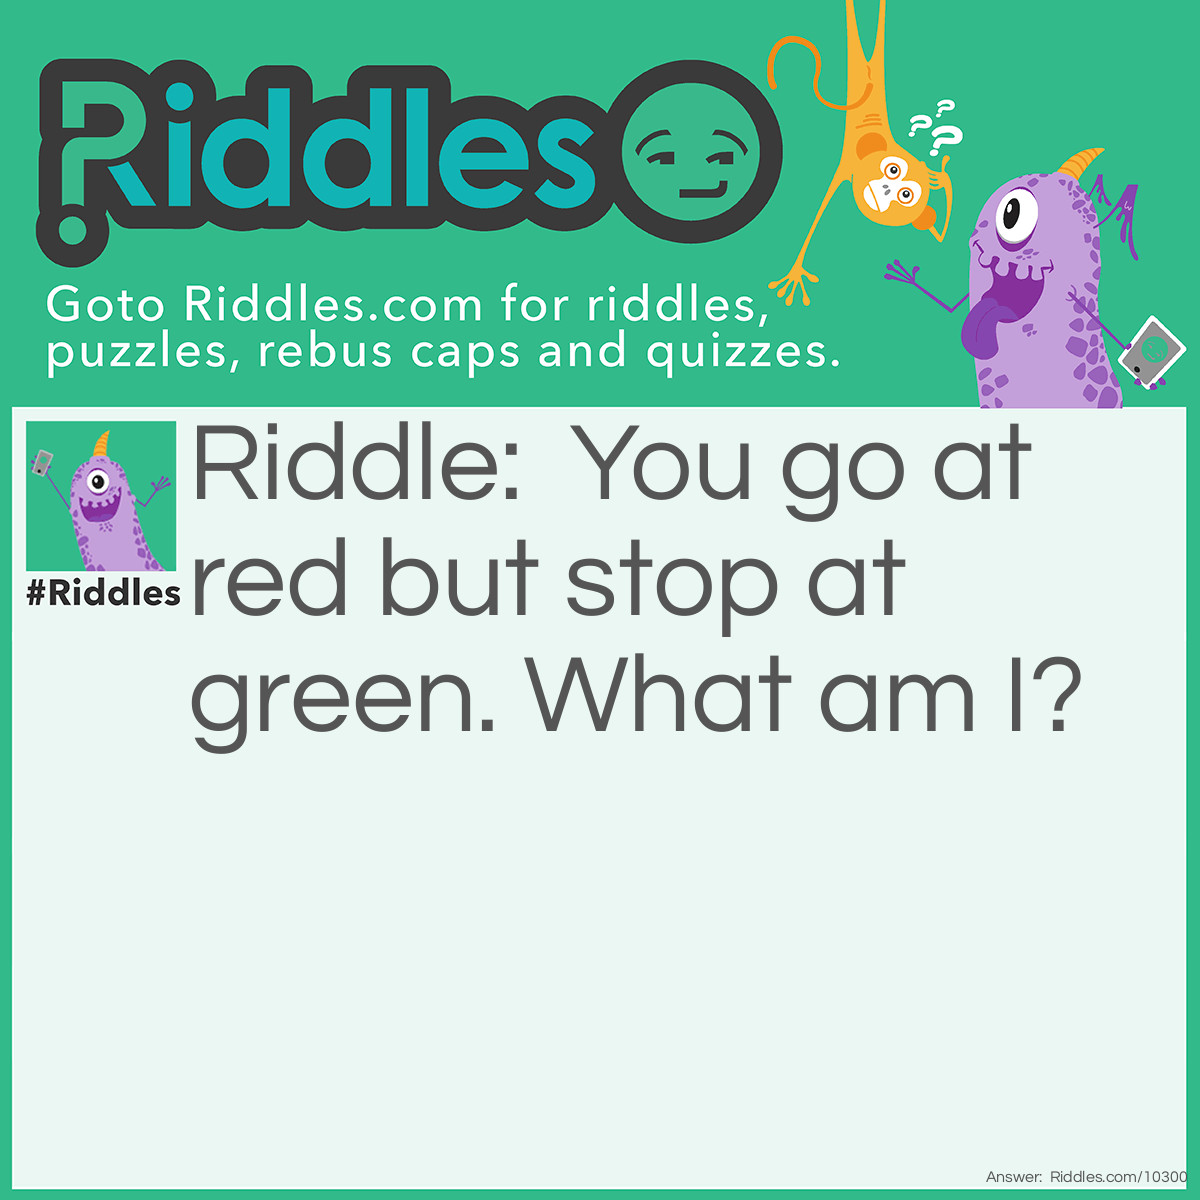 Riddle: You go at red but stop at green. What am I? Answer: A watermelon. You eat the red part, and you stop eating at the green part.